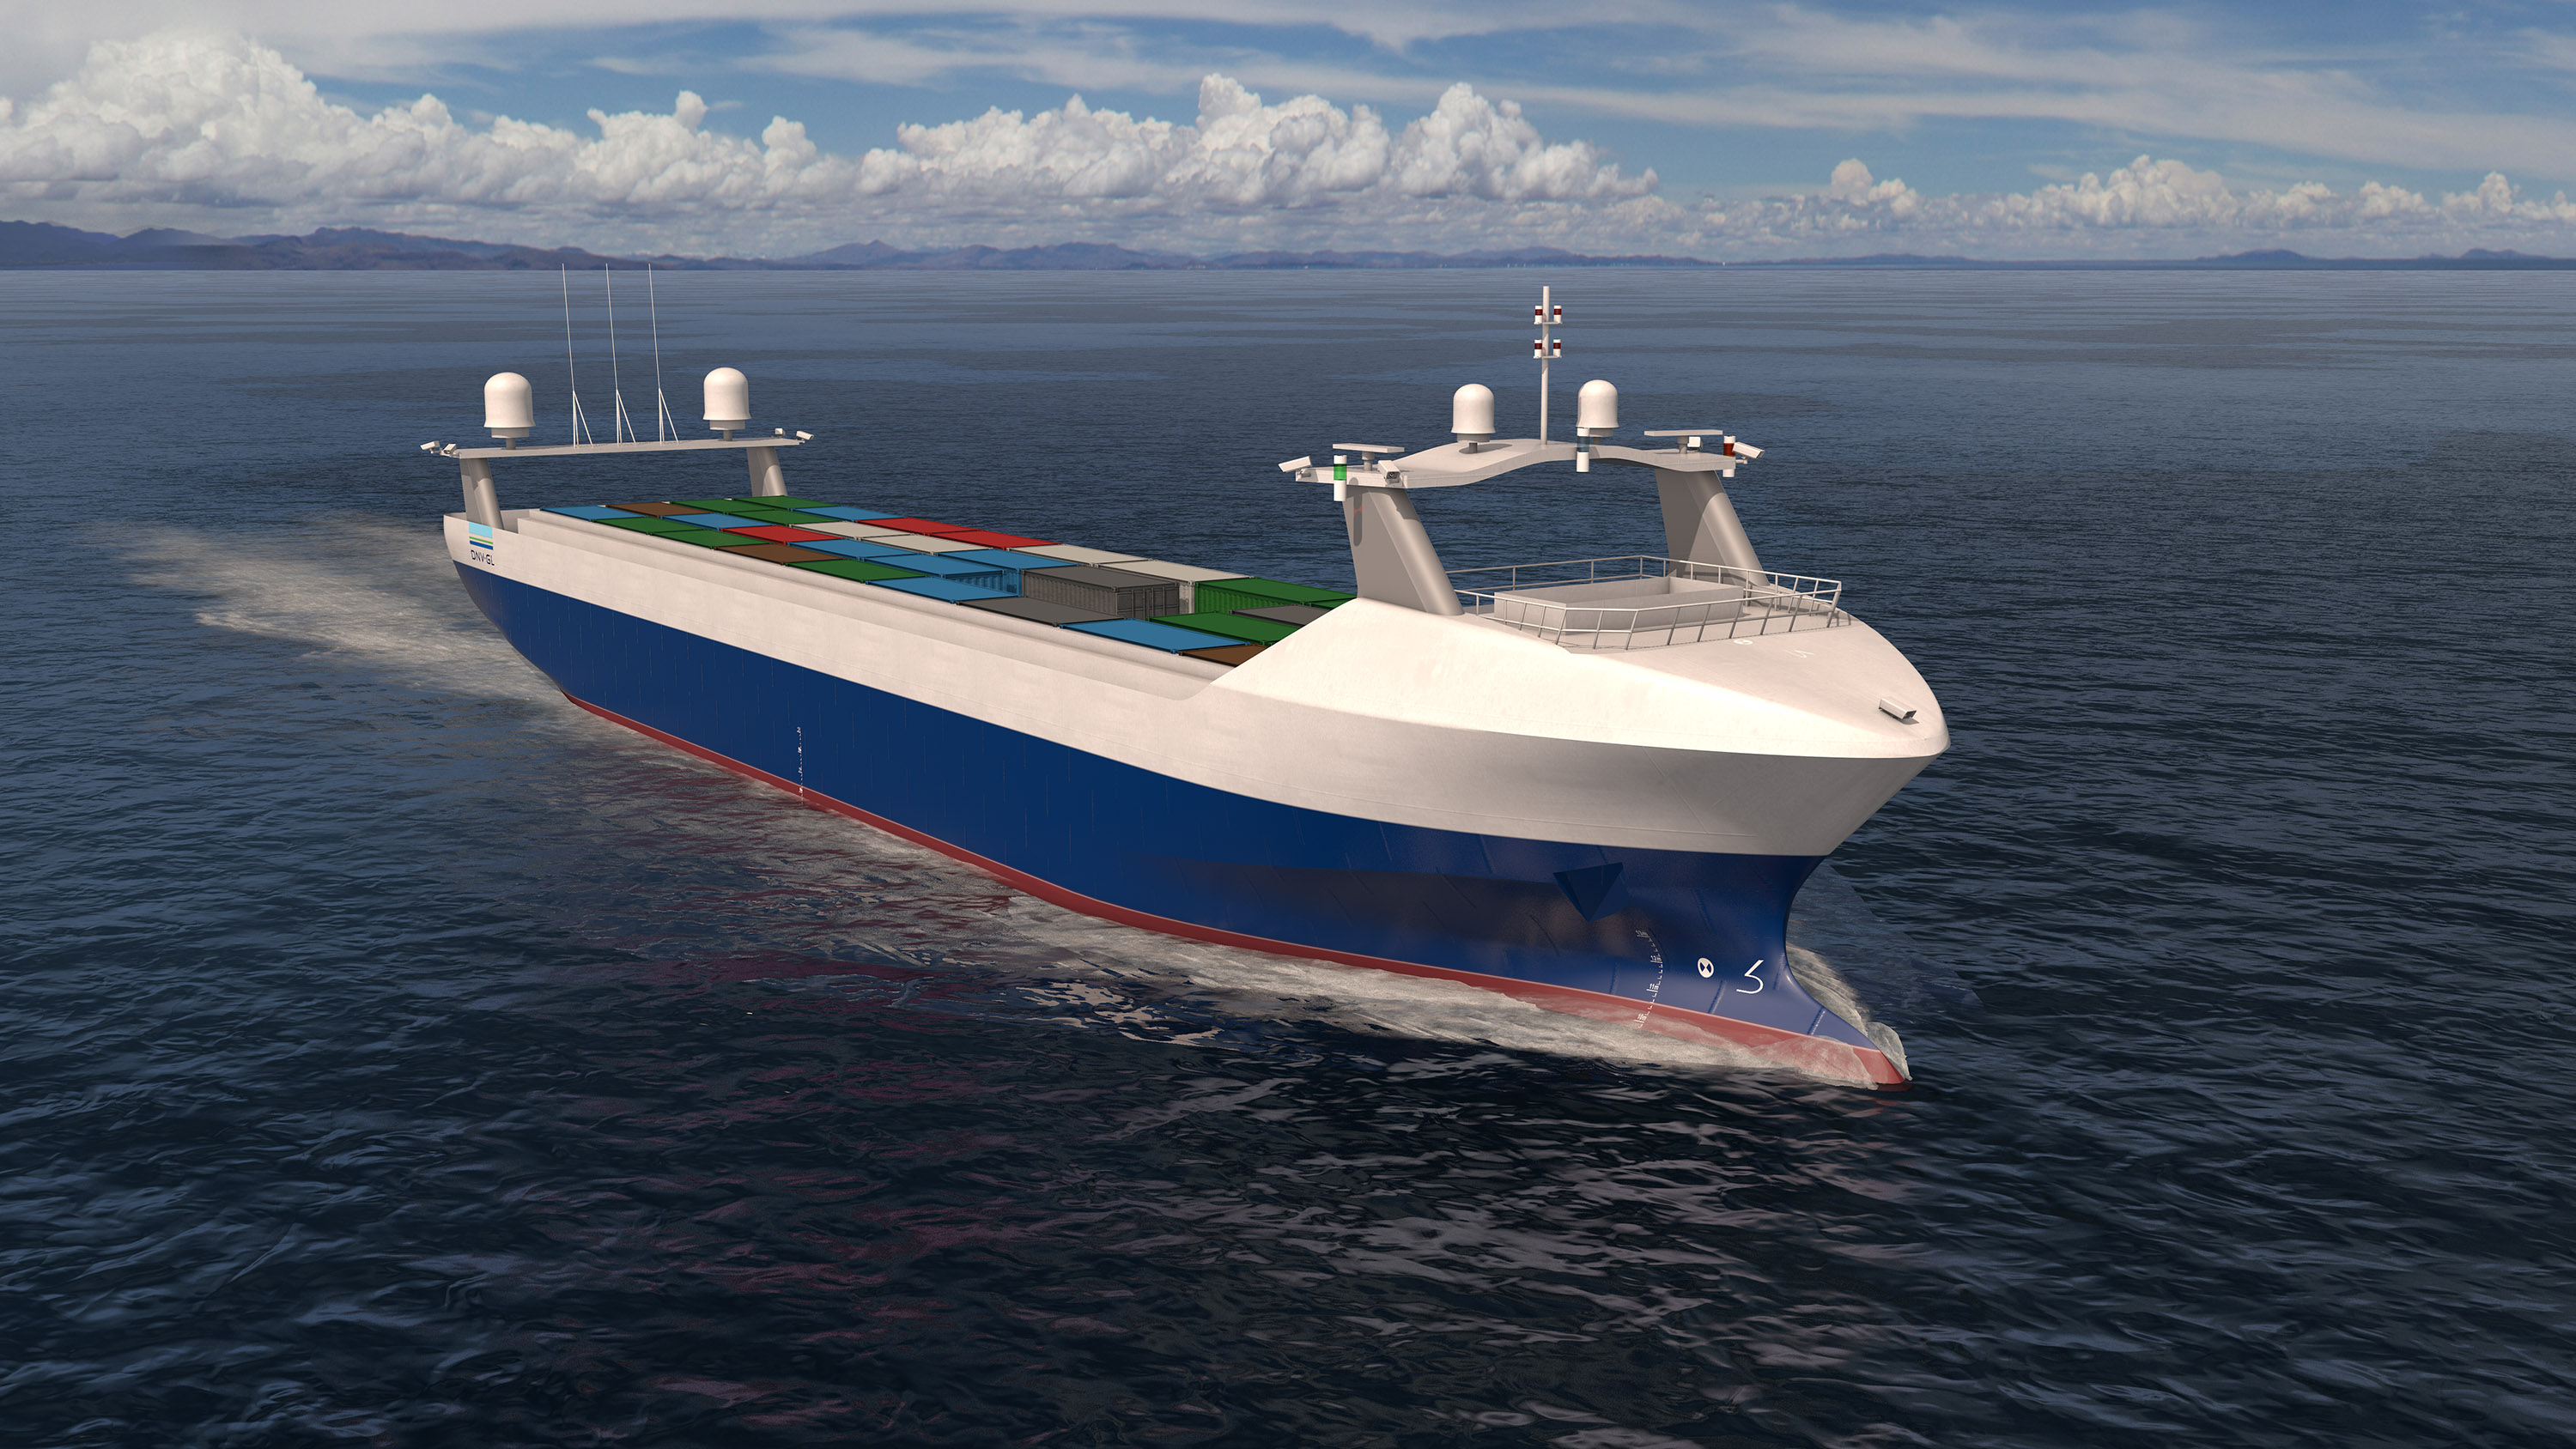 The first commercial autonomous vessels are due to launch in the next several years.